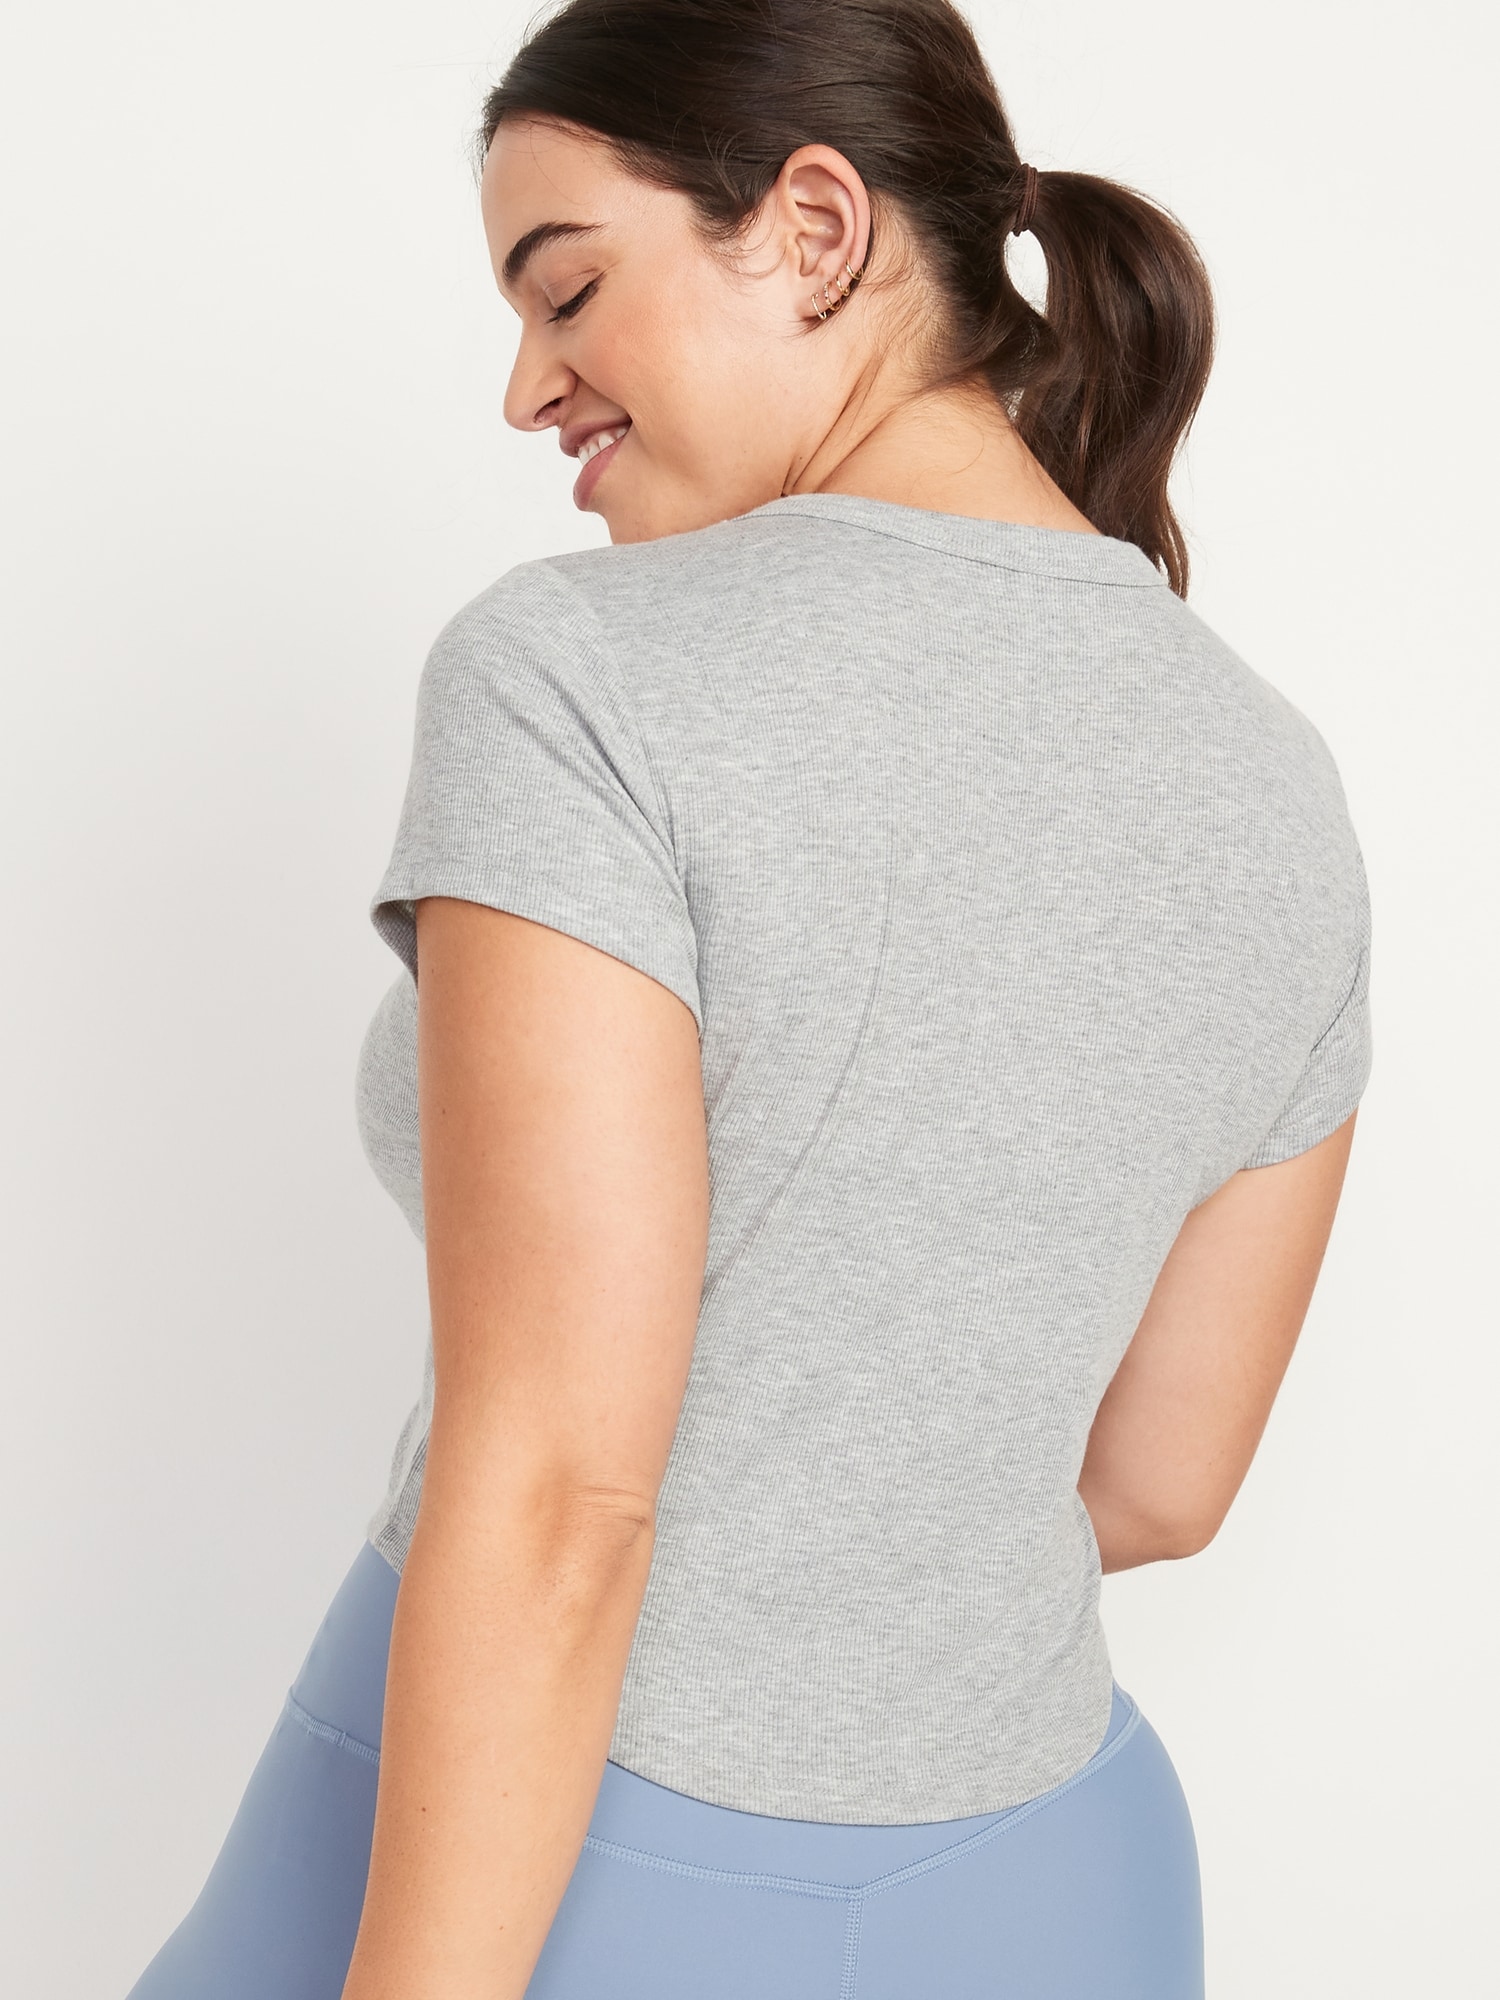 Short-Sleeve UltraLite Cropped Rib-Knit T-Shirt for Women | Old Navy